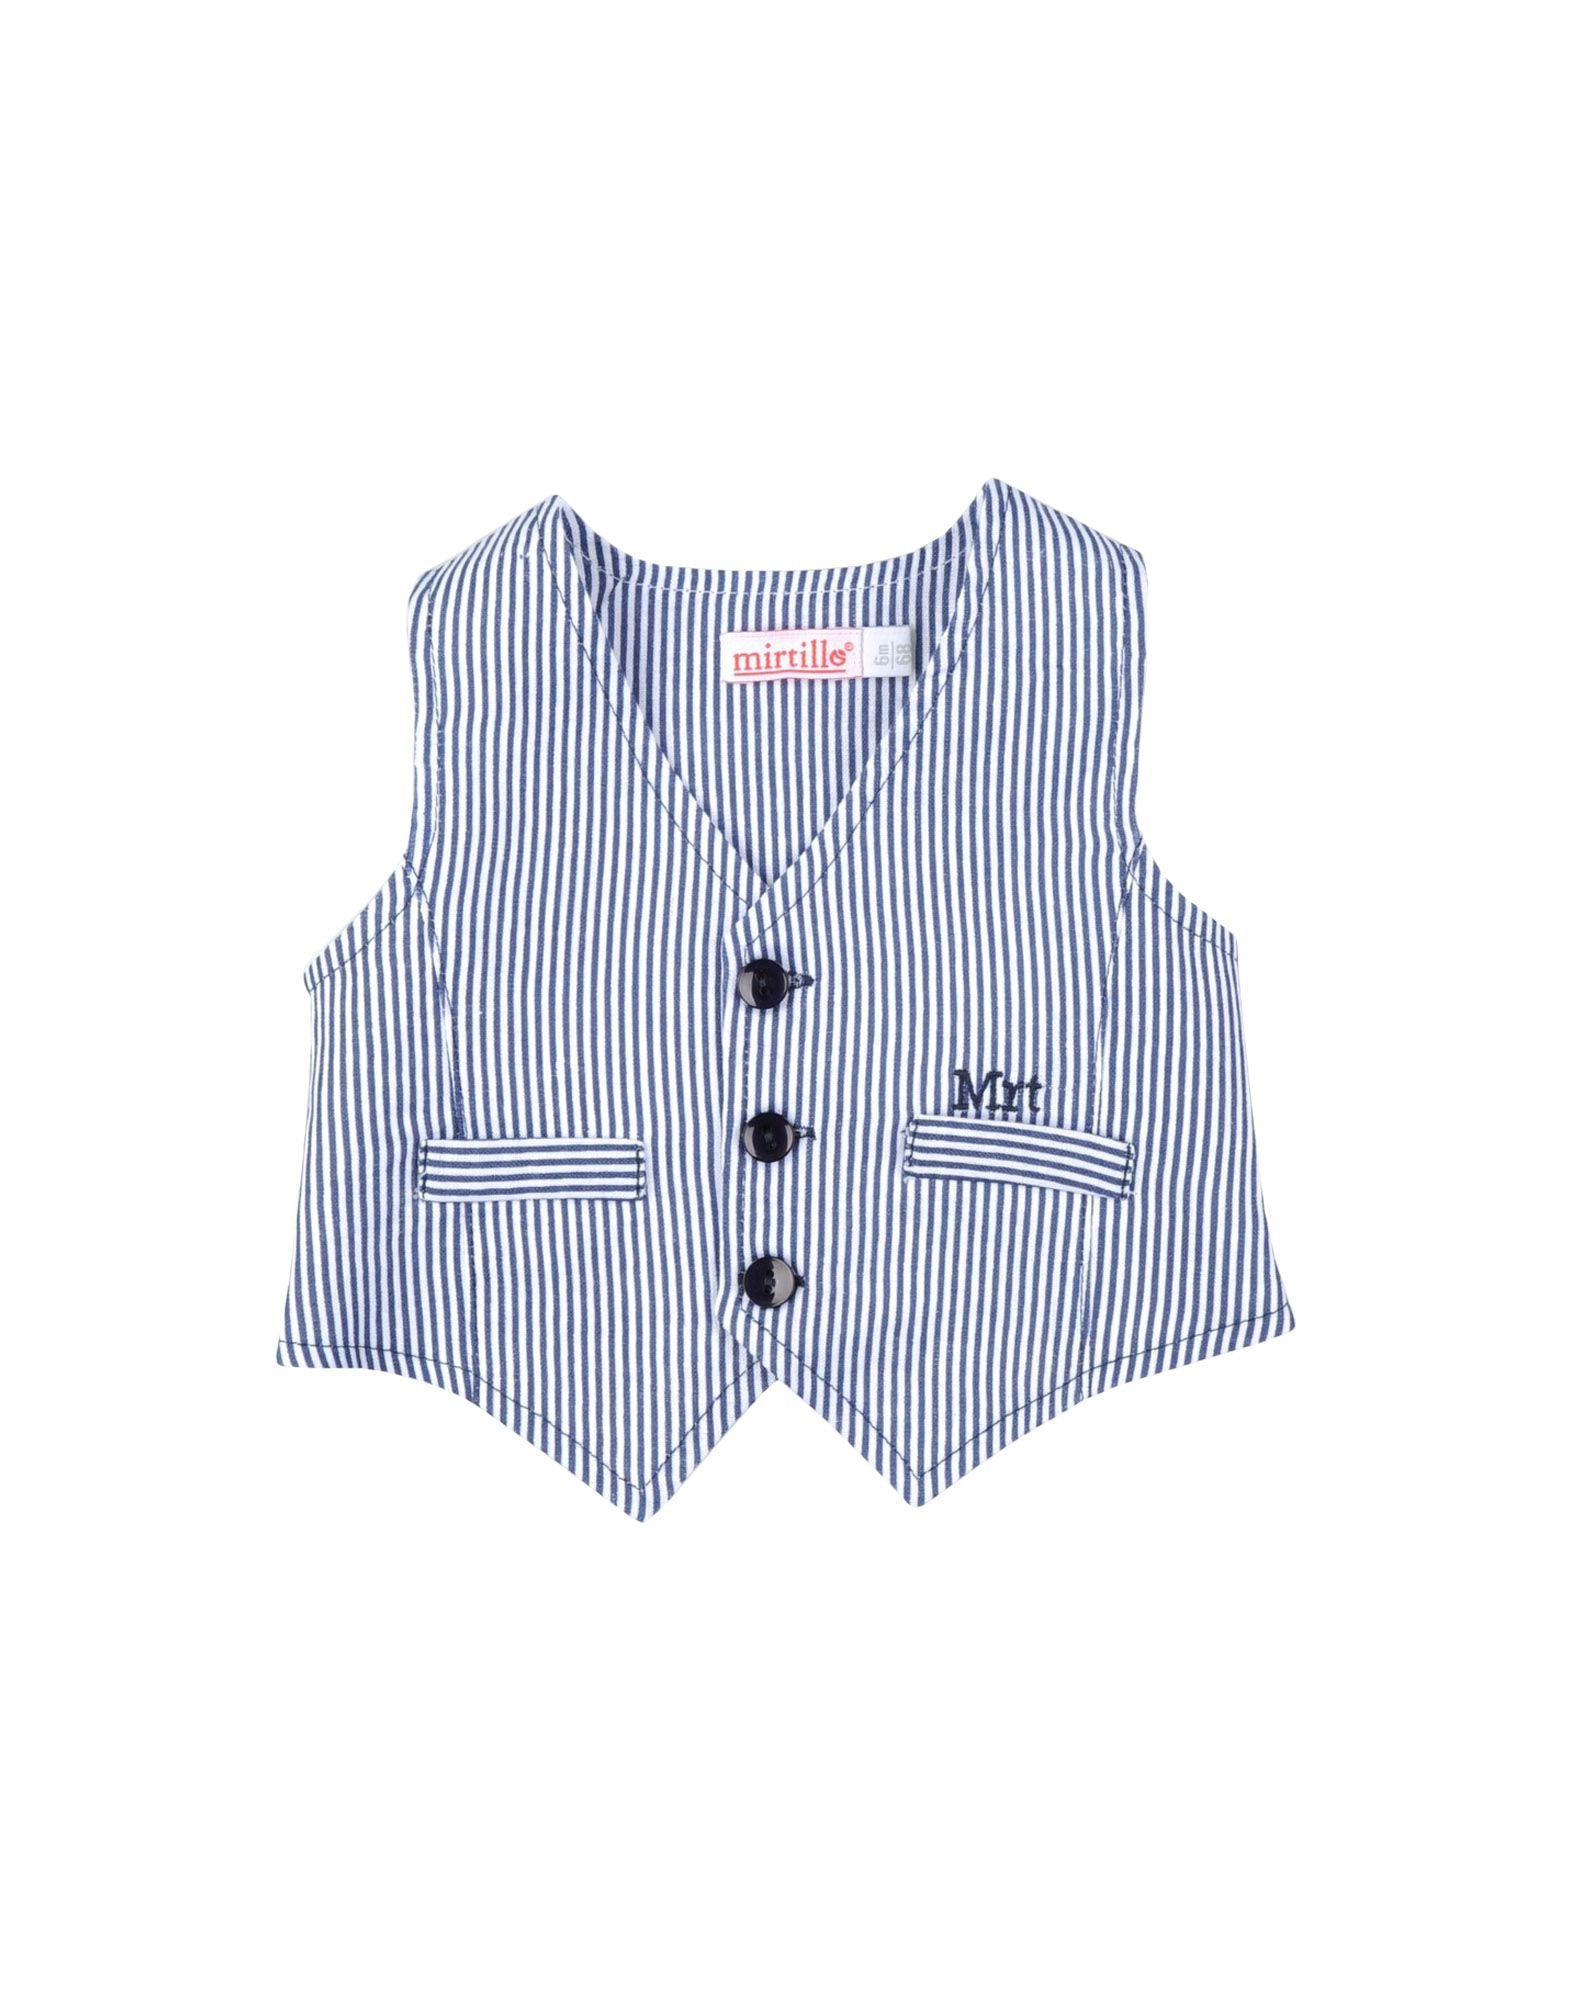 
  Vest from the children's clothing line Mirtillo with buttoning on the front and small pockets,...